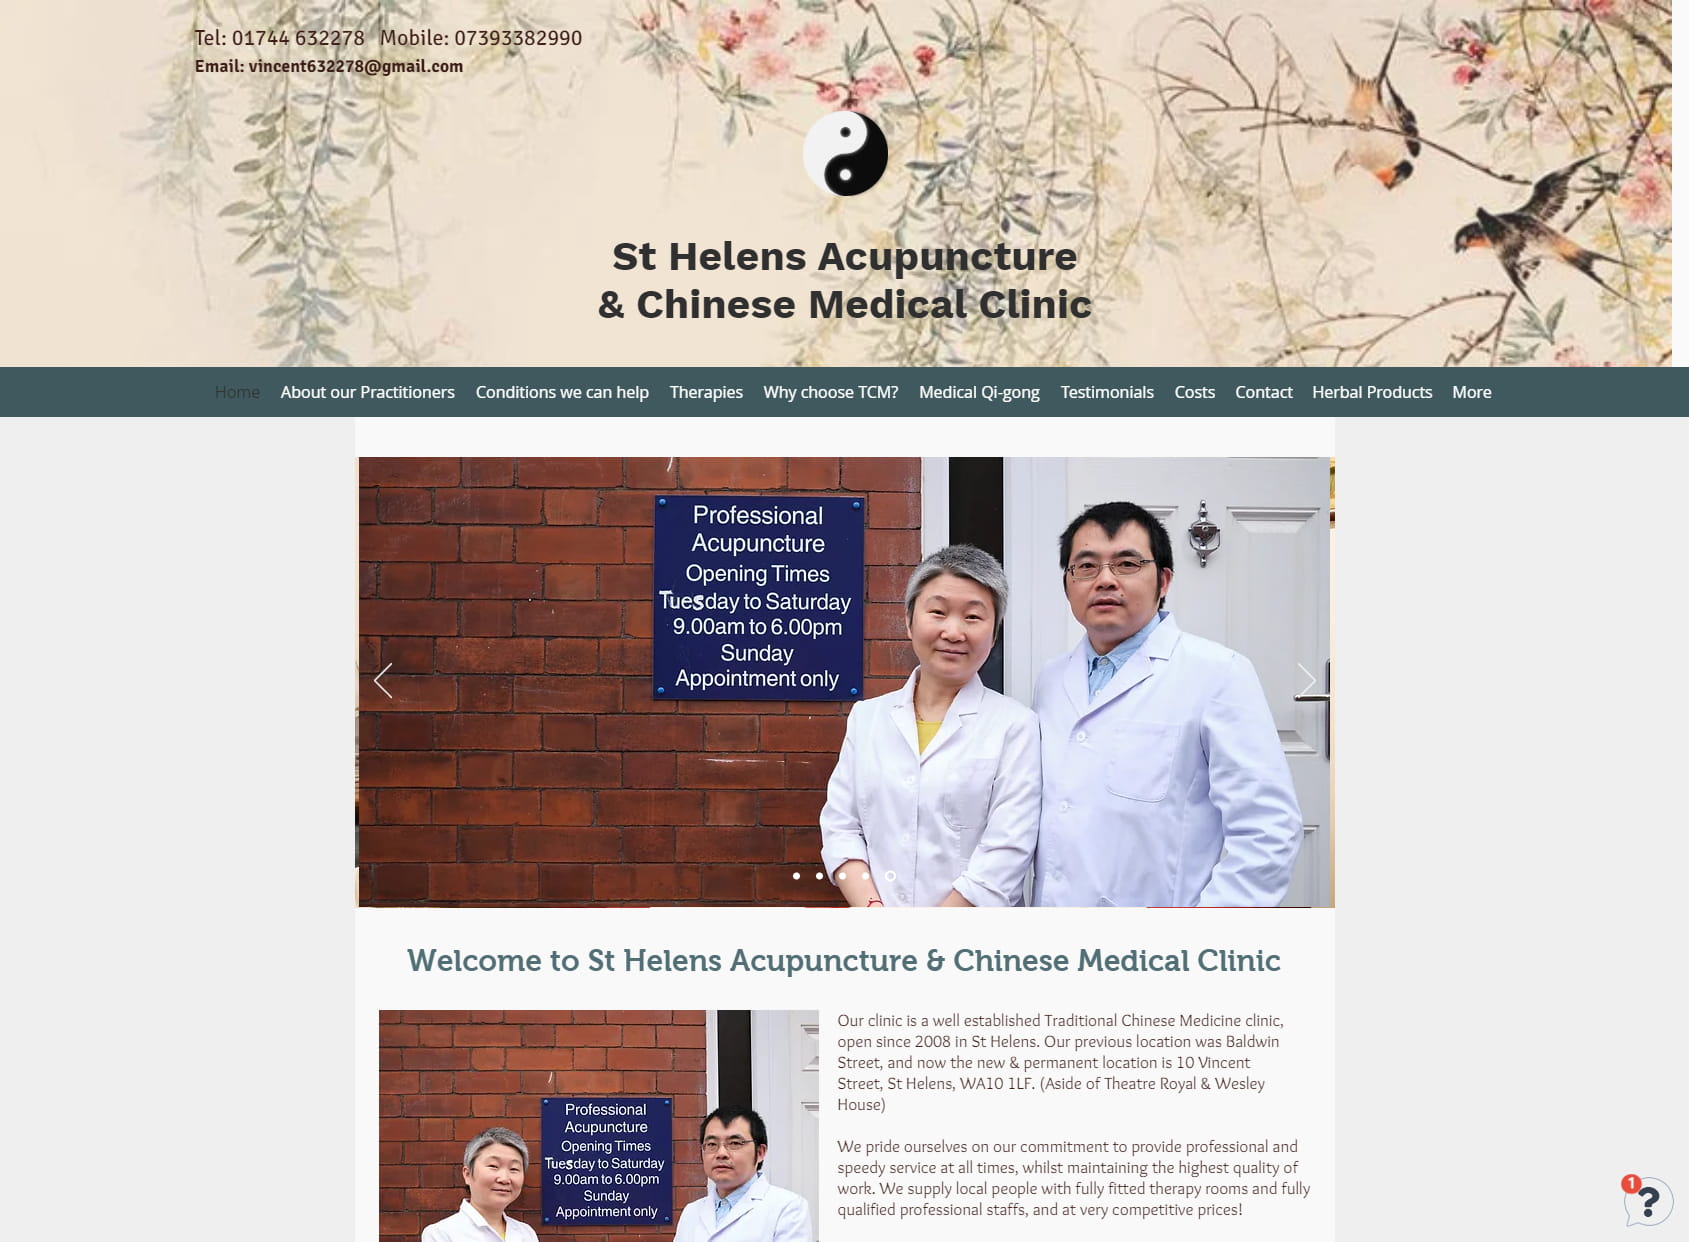 St Helens Acupuncture & Chinese Medical Clinic